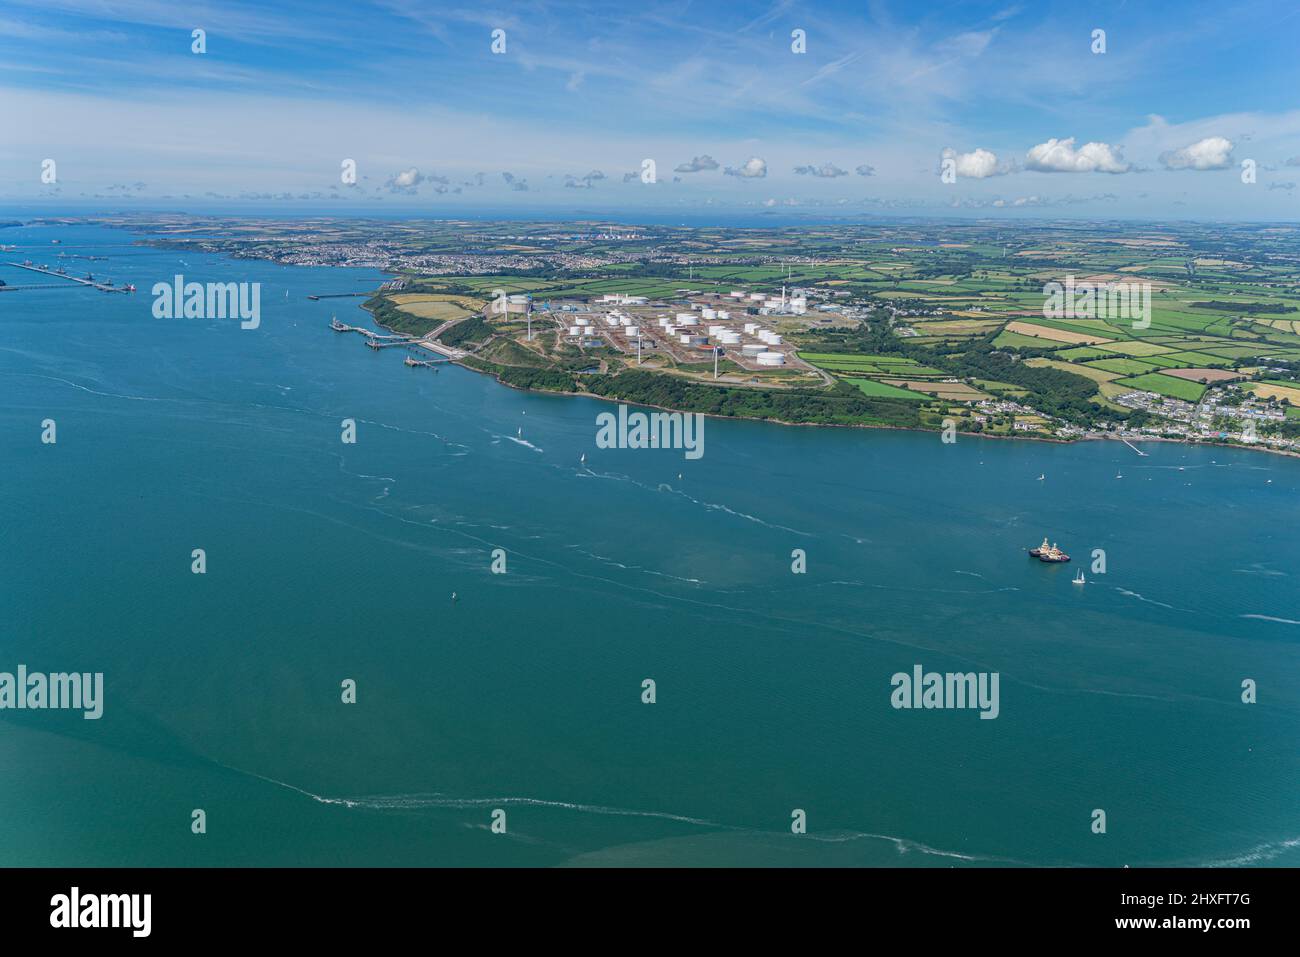 The busy Milford Haven Waterway and Oil and Gas terminals at Hakim, Pembrokeshire Stock Photo